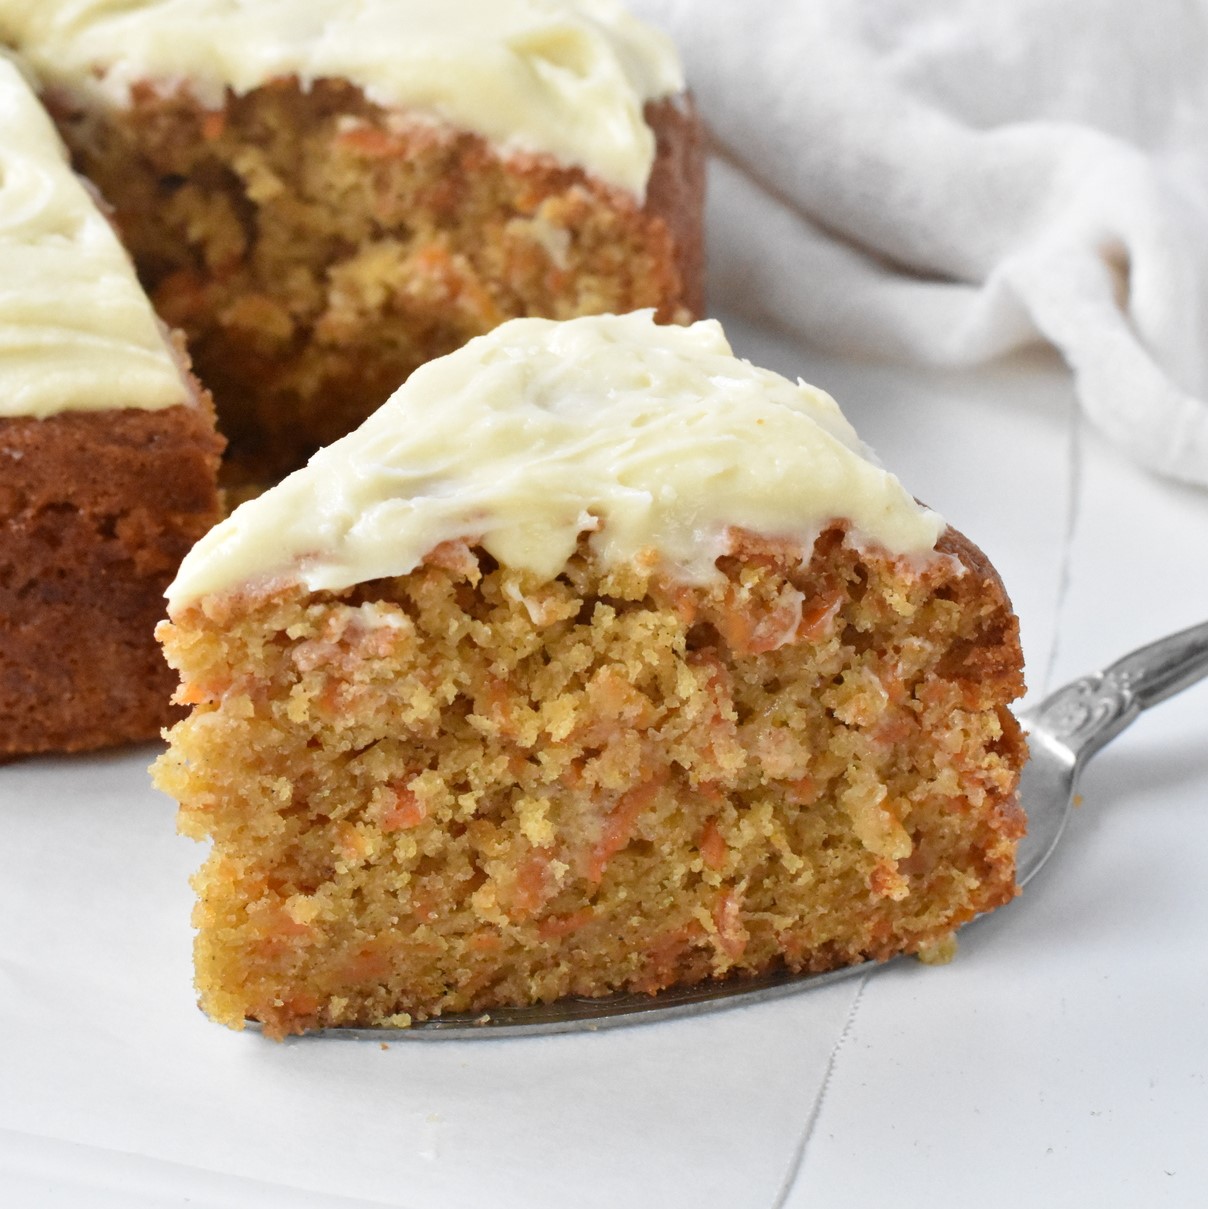 Slice of carrot cake with cream cheese frosting on cake server.